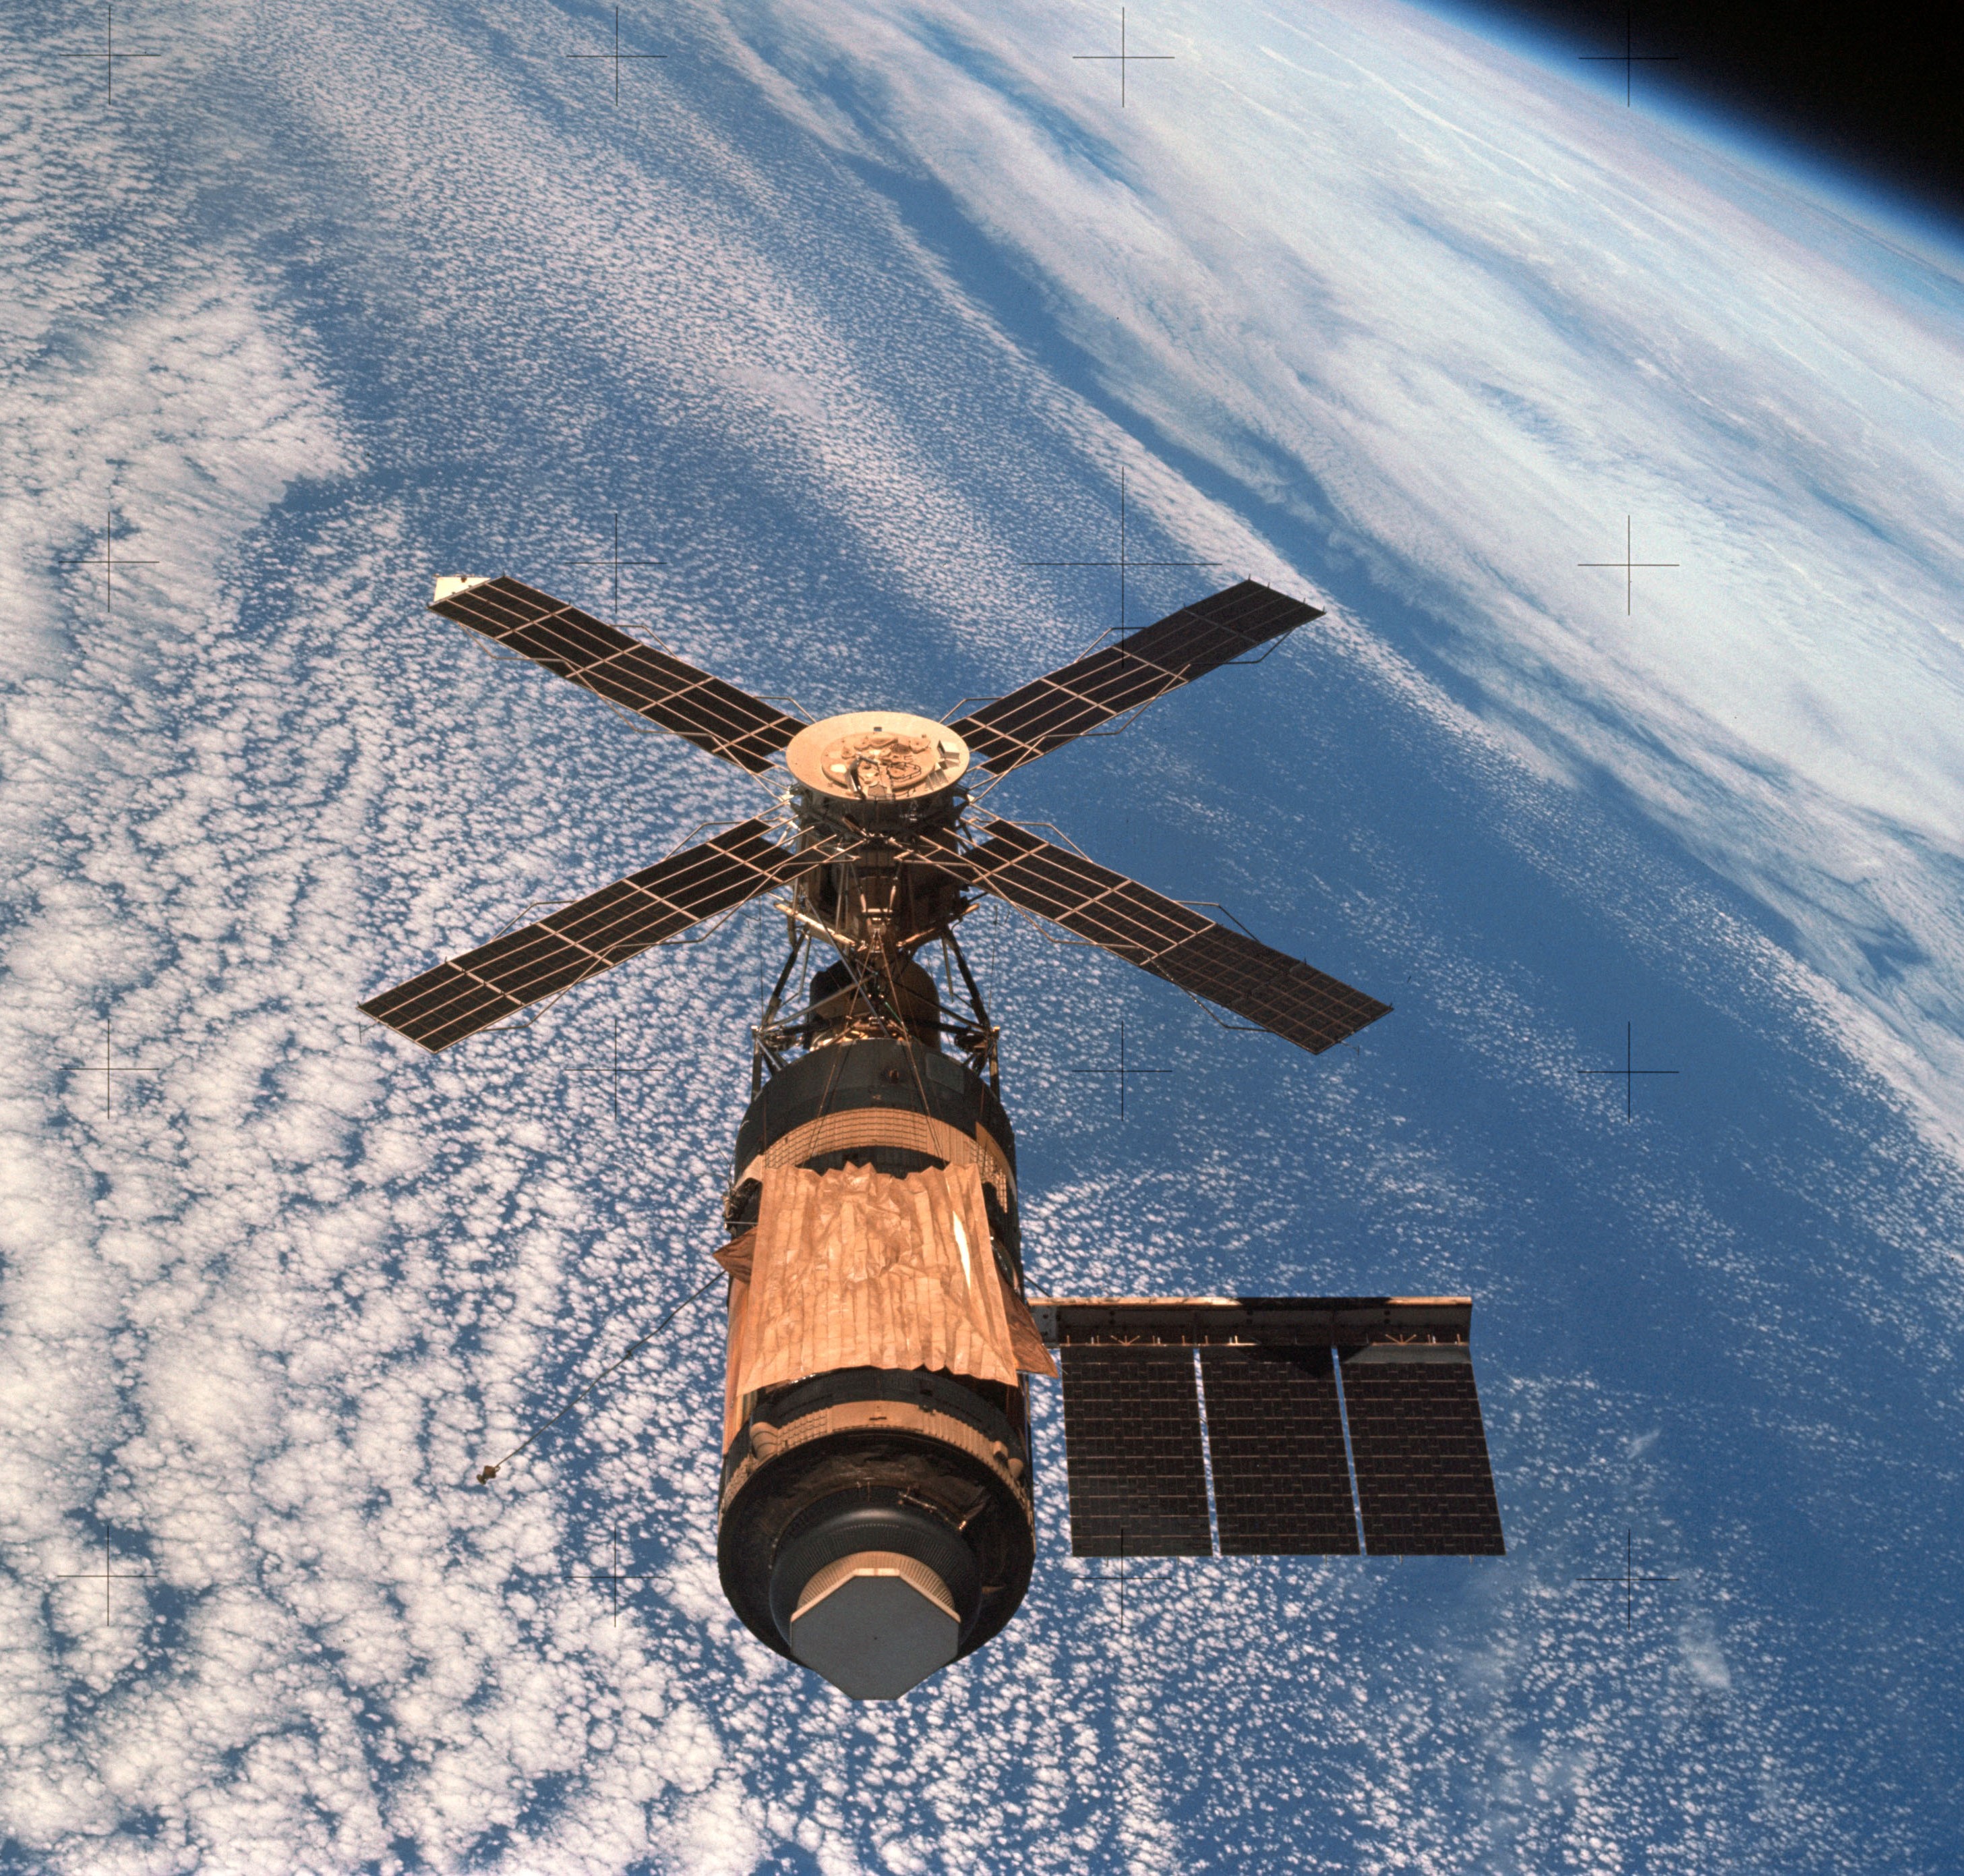 The Skylab space station, photographed by the third and final crew after its departure in 1974